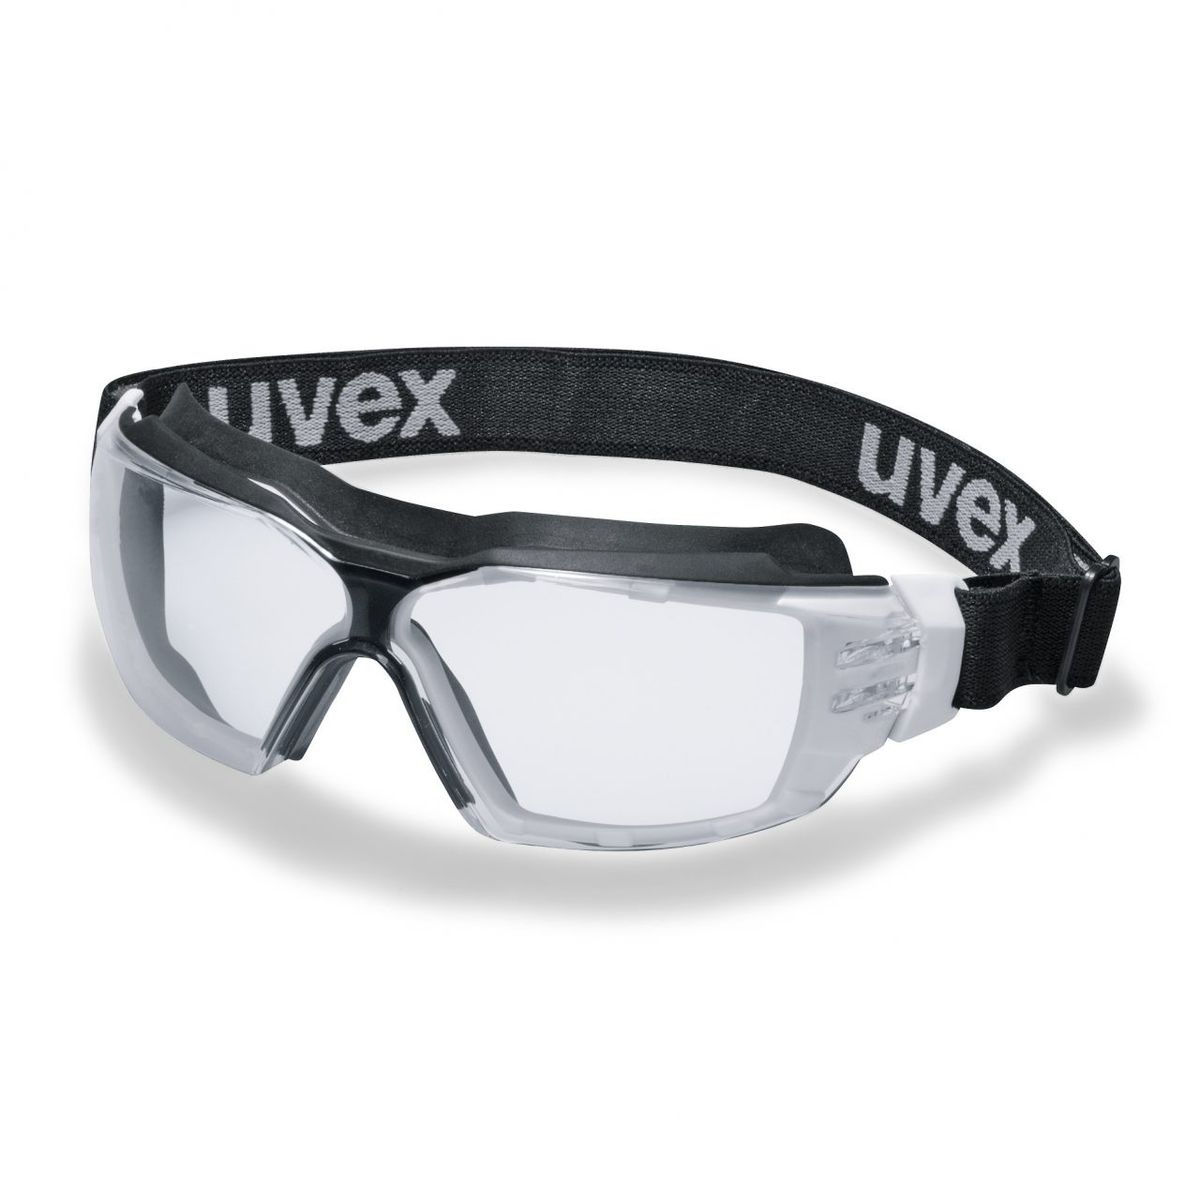 uvex pheos cx2 sonic Safety goggles - Black-Clear